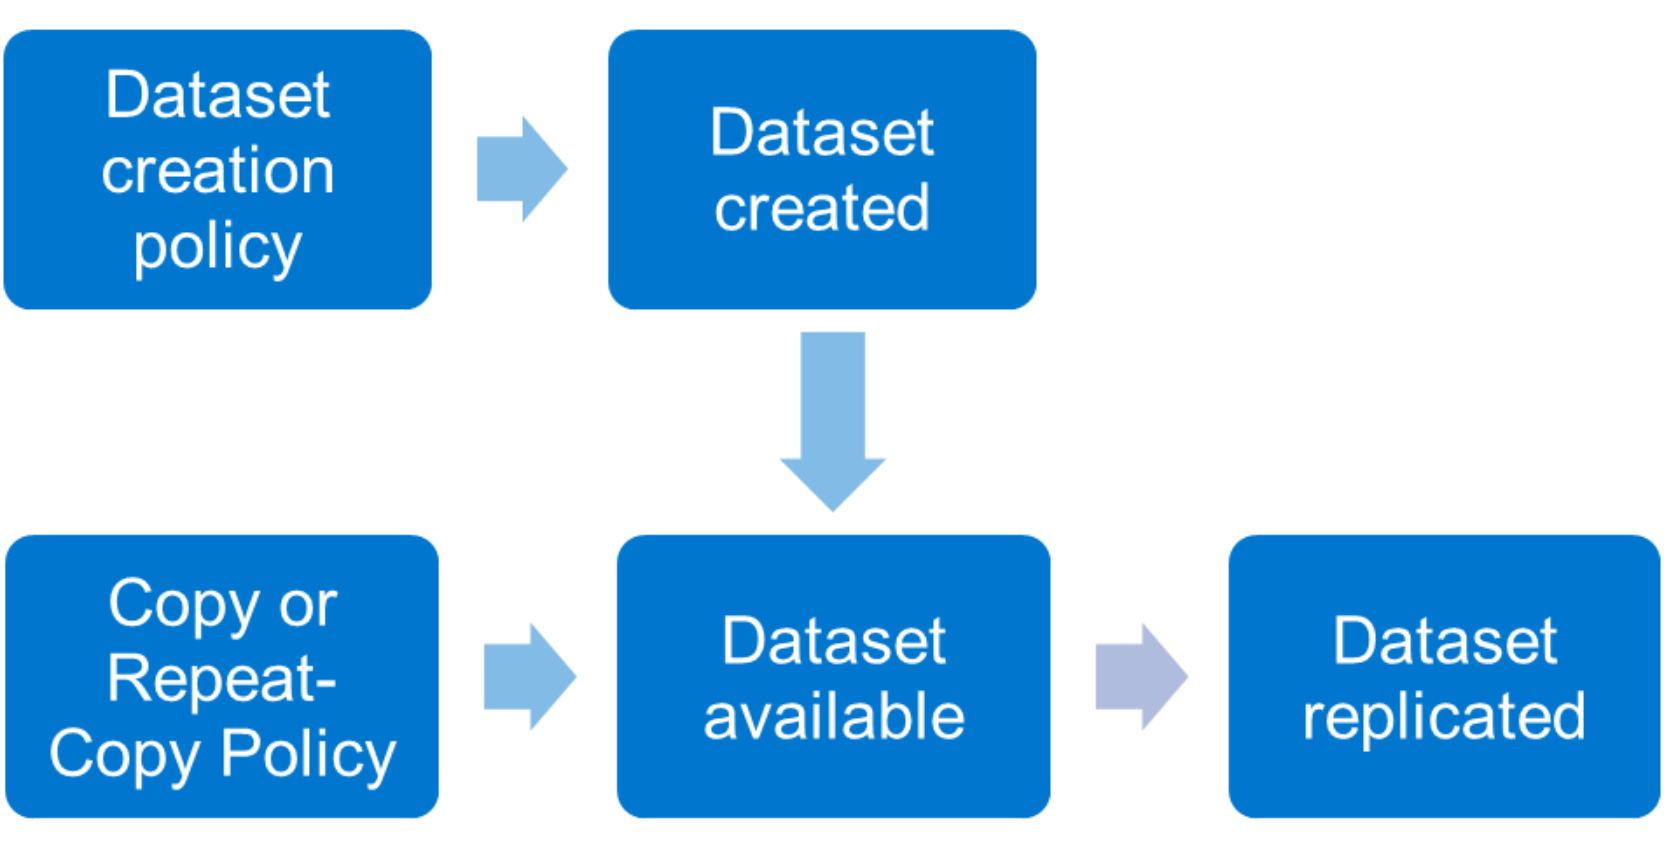 A figure illustrating how a dataset creation policy is different from a copy or repeat-copy policy.